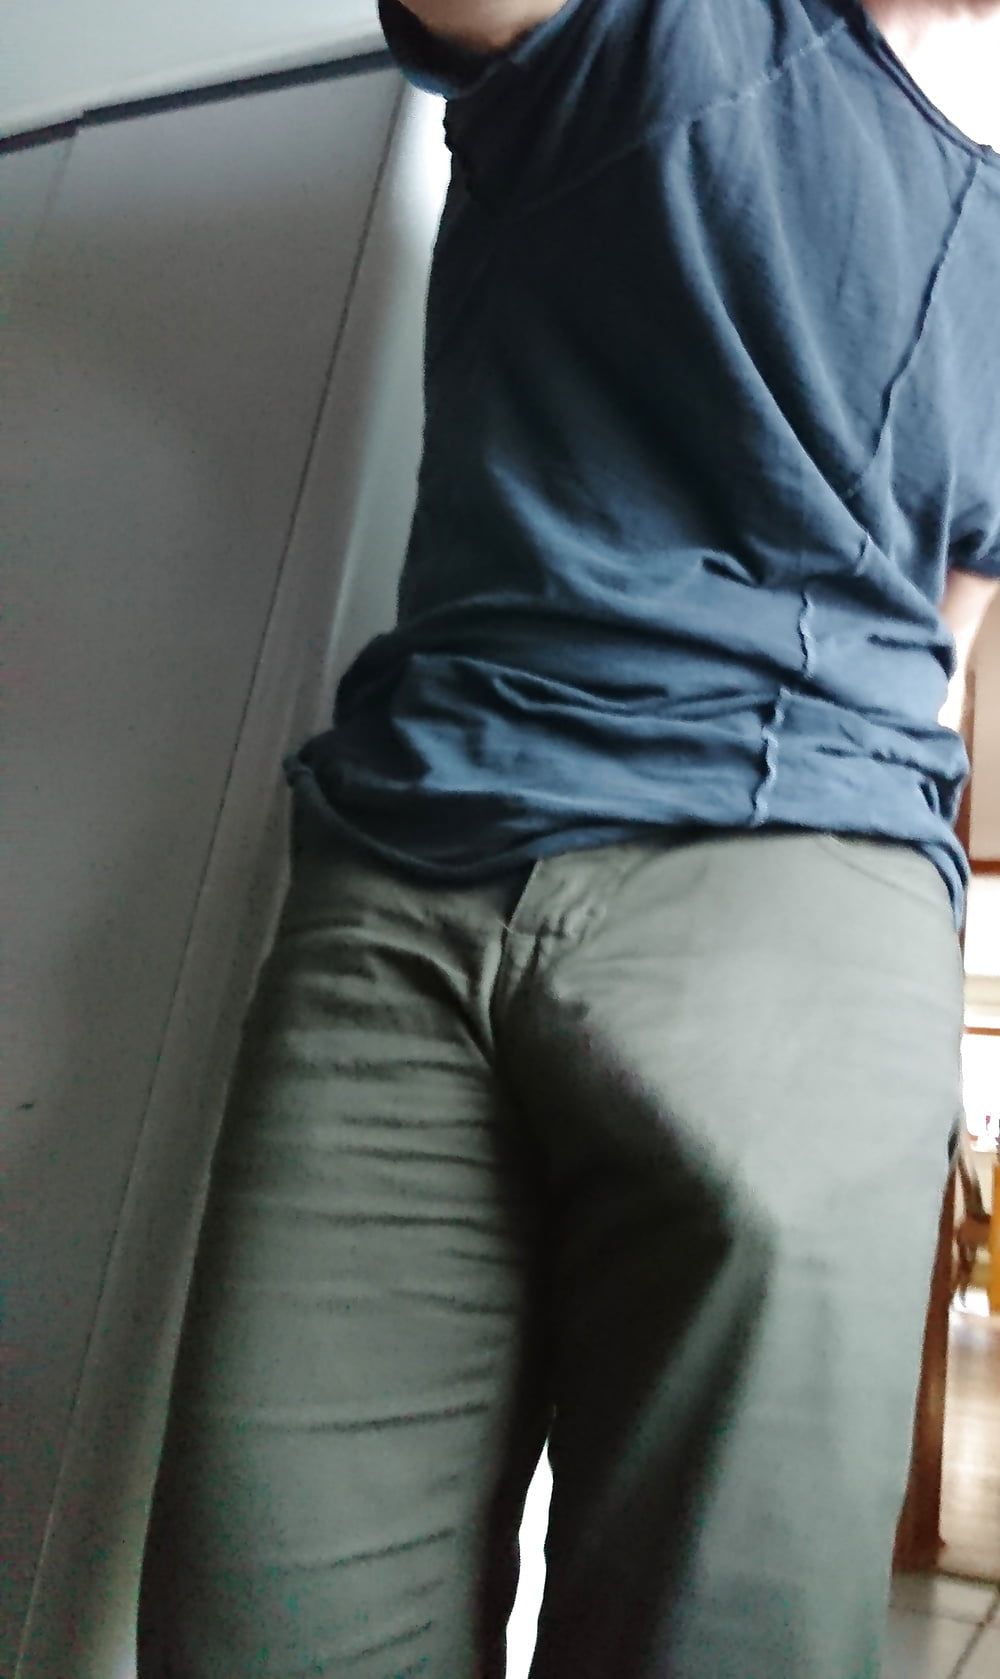 Giant cock in tight jeans #5